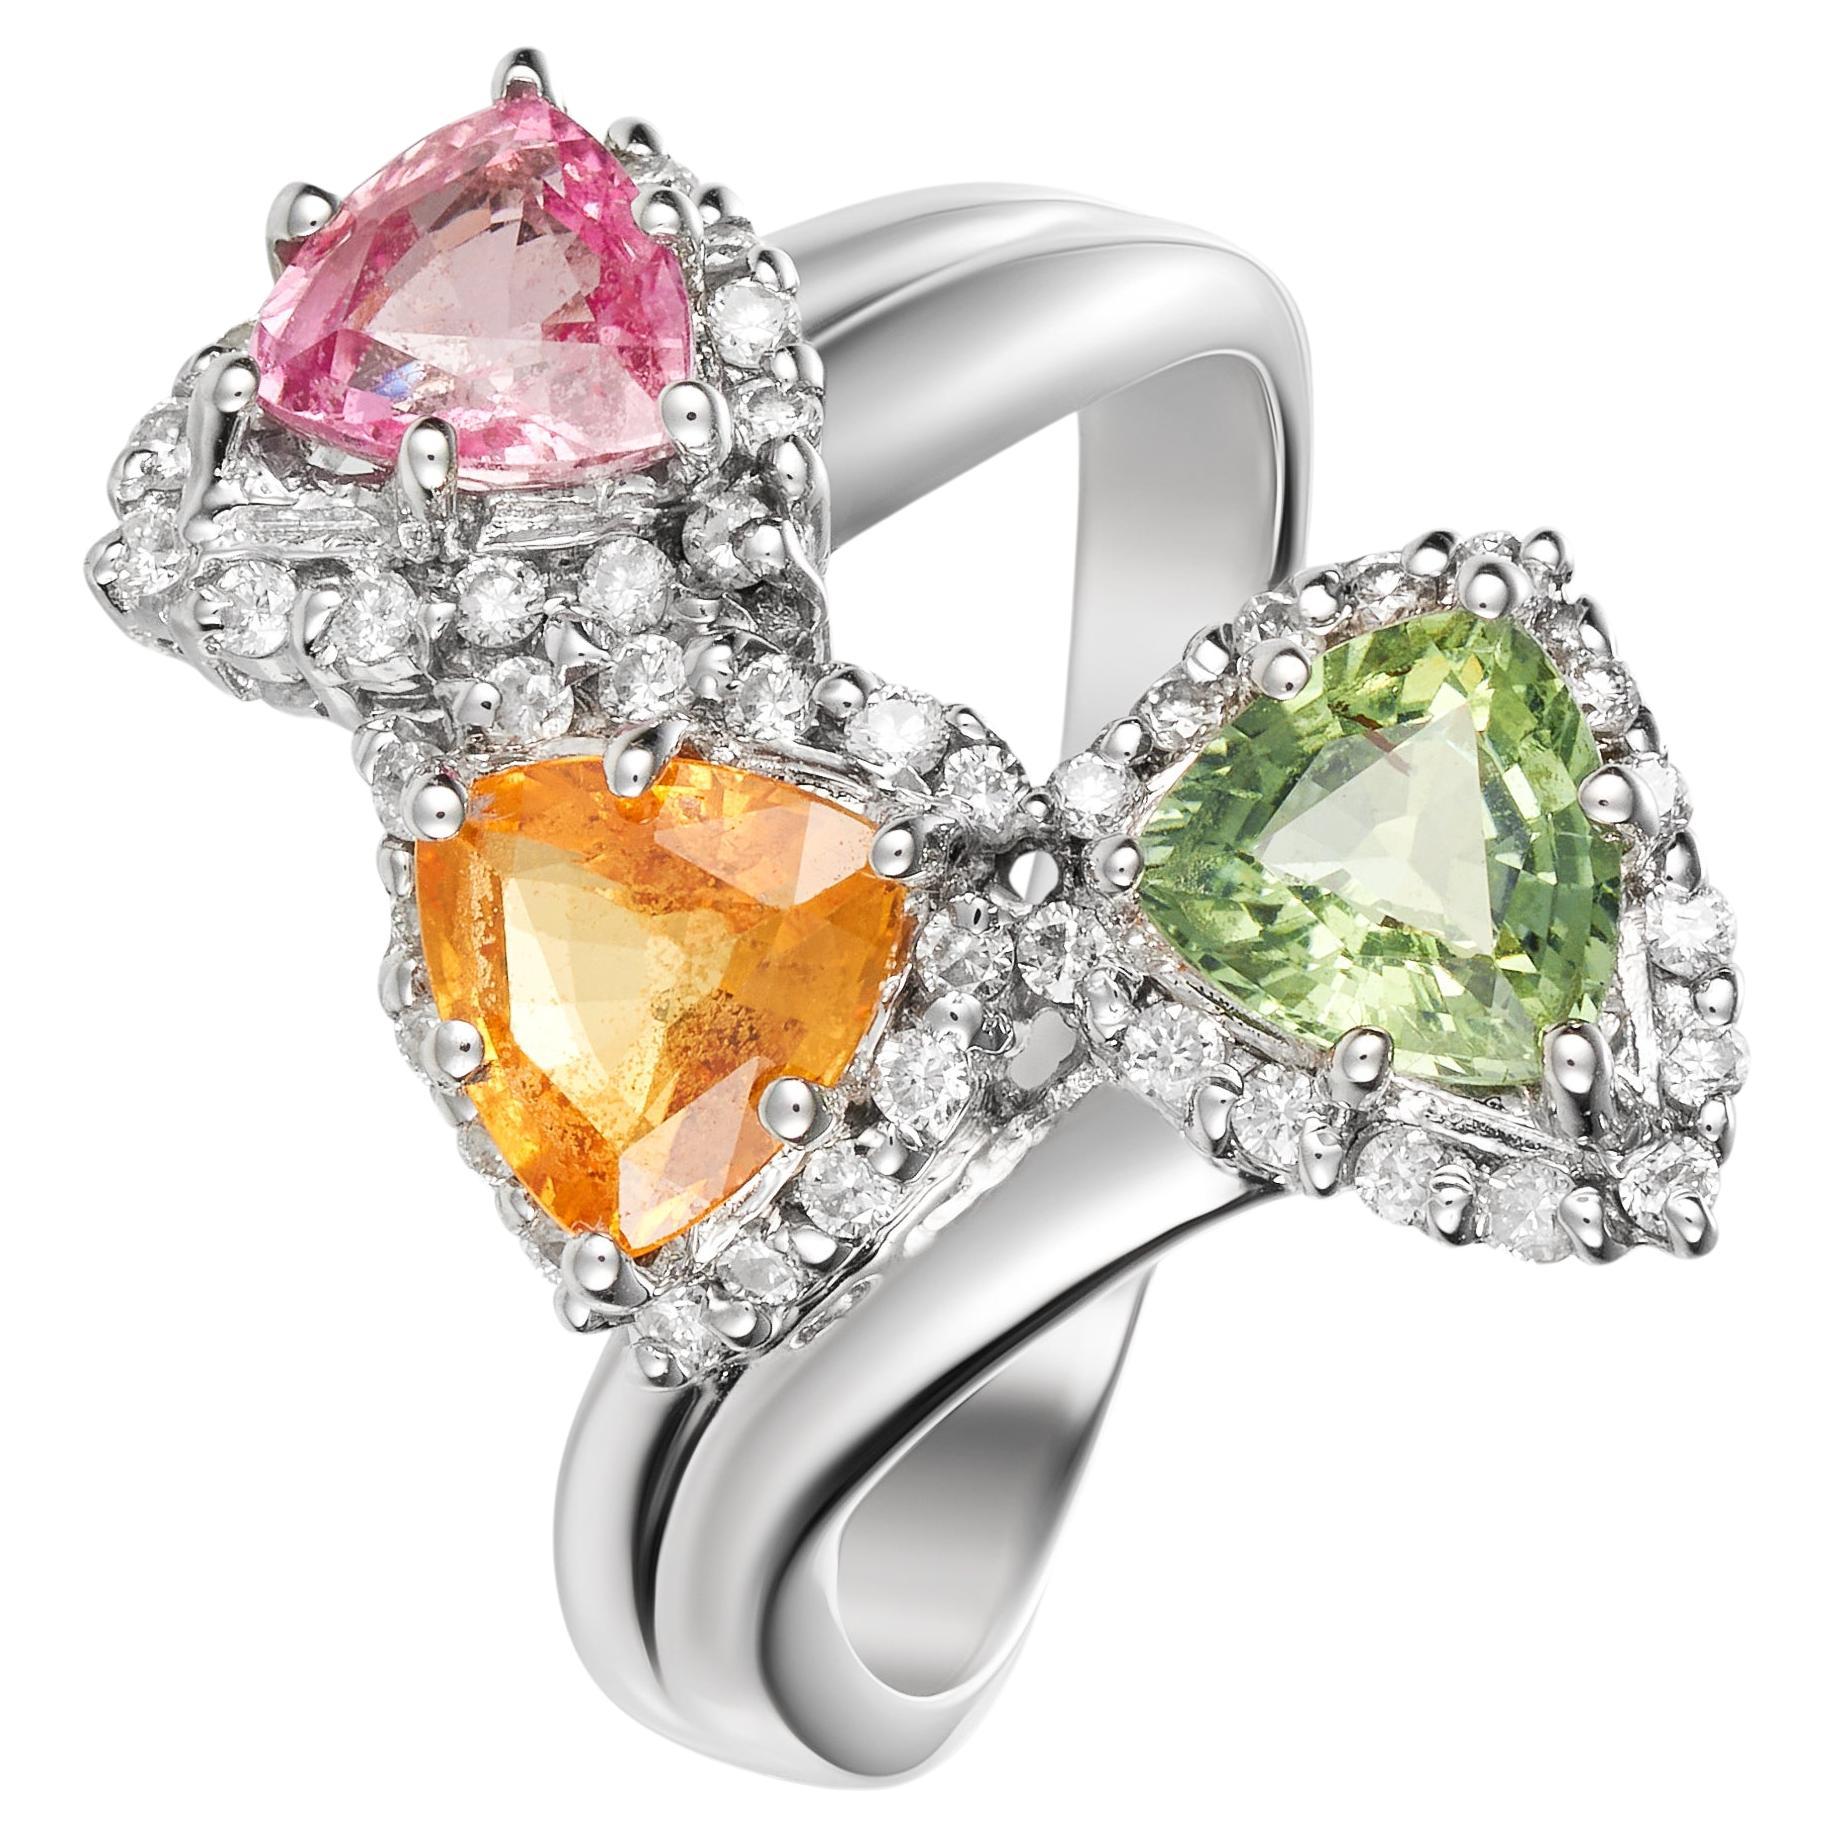 Gemstones:  Natural Pink, Green and Orange Sapphire
Weight of Sapphires : 2.66 carats
Conflict free natural diamonds. 
Metal: Platinum
Certificate: Gem Grading System Japan 

The purchase of this ring will be accompanied with a formal and